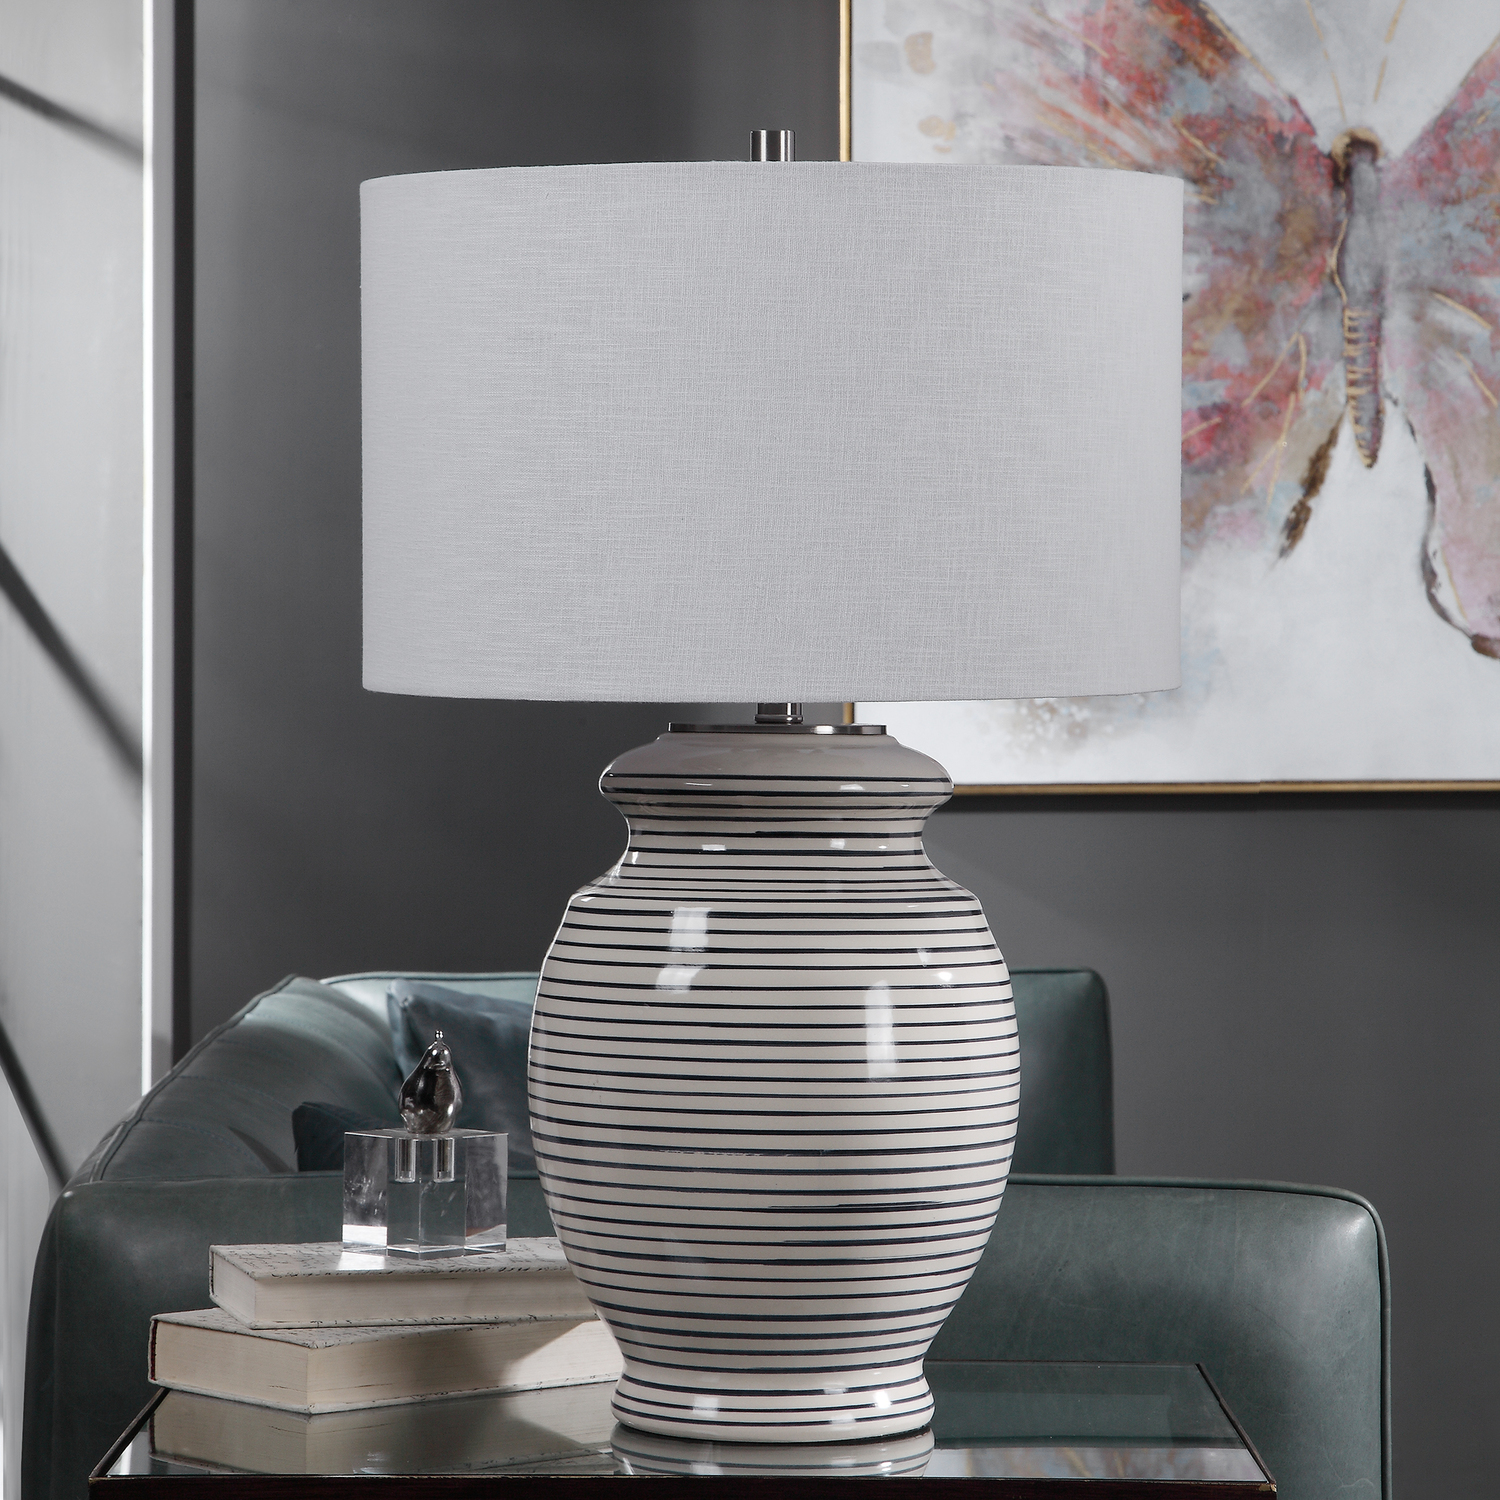 Uttermost Marisa Off White Table Lamp Table Lamps This Table Lamp Has A Ceramic Base Finished In An Off-white Glaze With Navy Blue Stripes, Accented With Brushed Nickel Details.